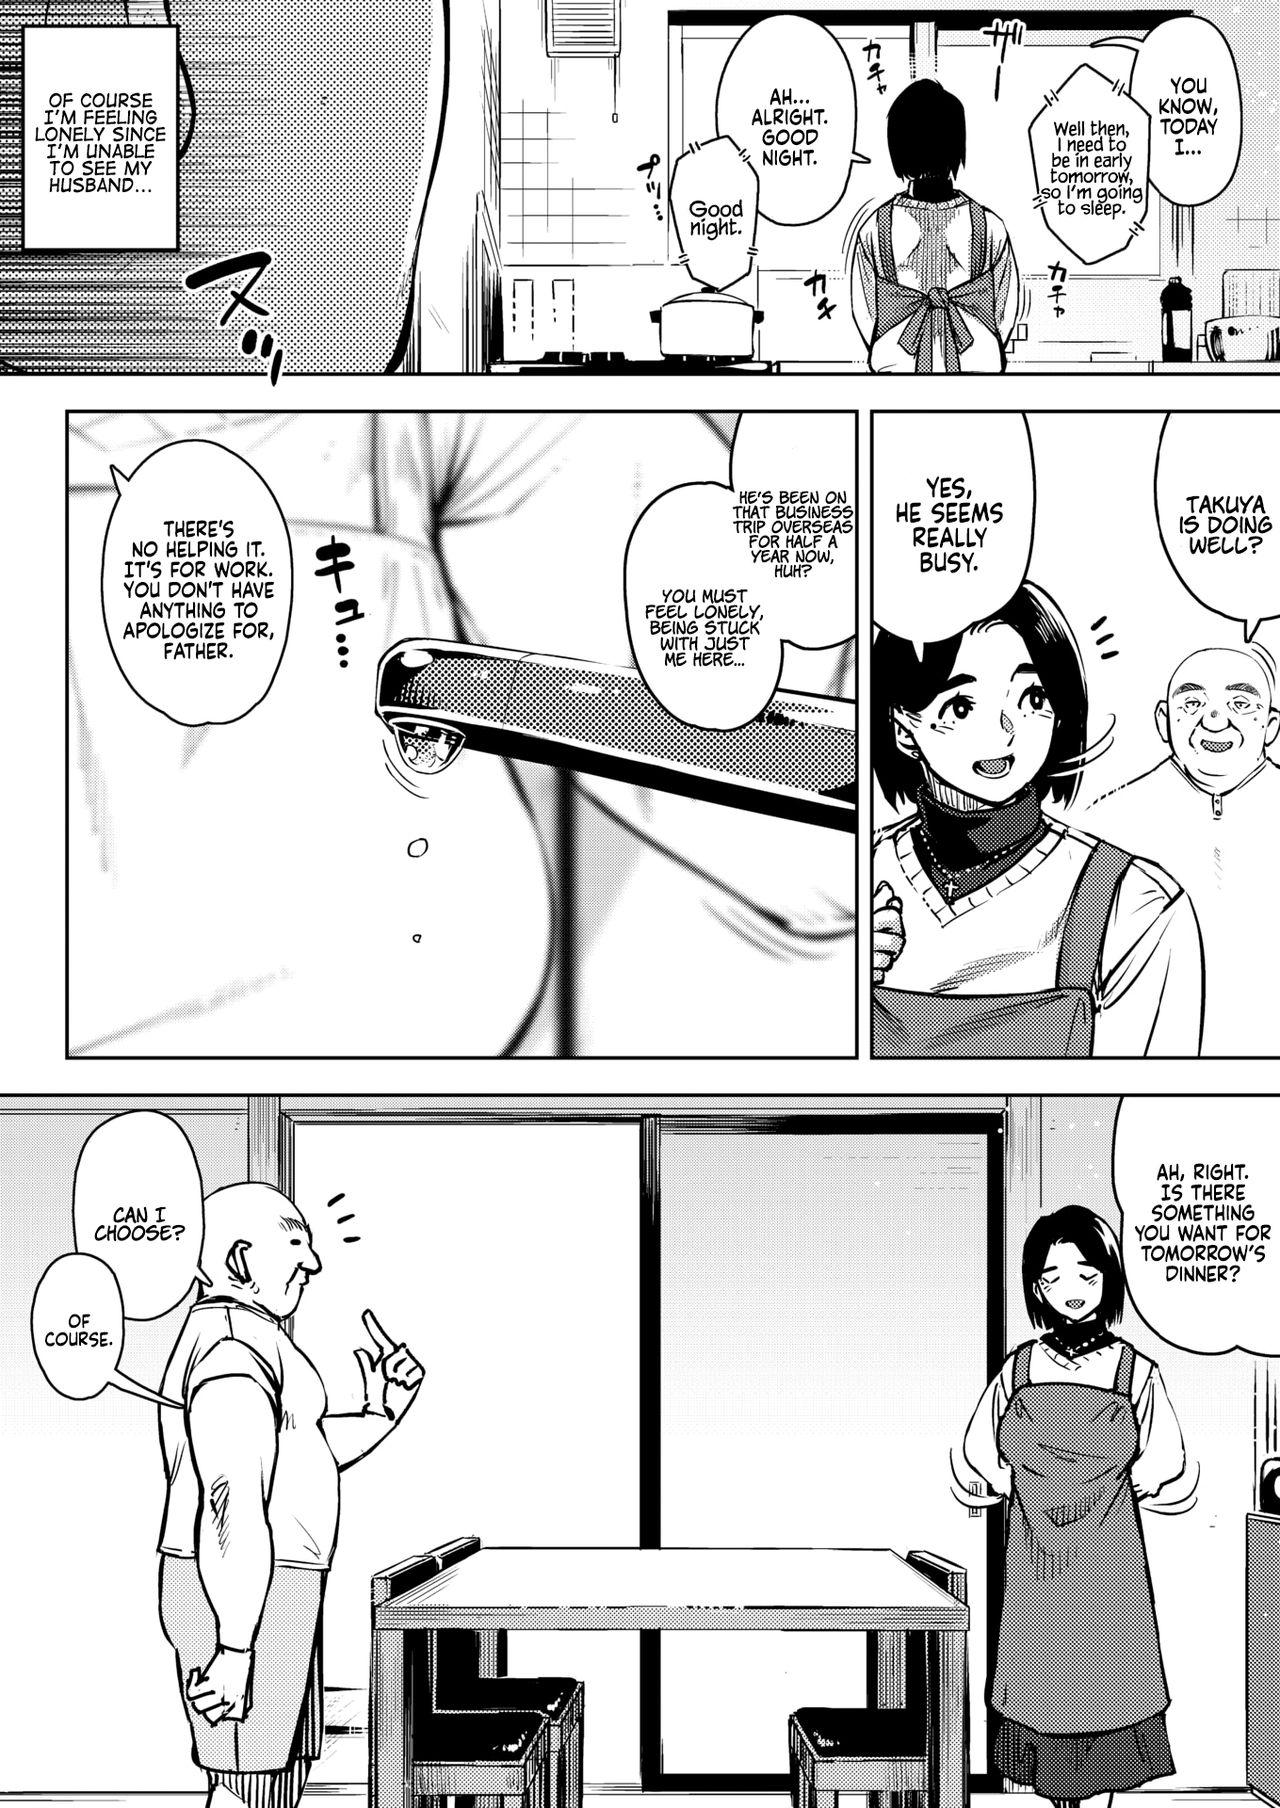 Teasing [Rocket Monkey] Gifu to... Zenpen | With My Father-in-Law... First Part (COMIC HOTMiLK Koime Vol. 27) [English] [Coffedrug] [Digital] Passion - Page 2